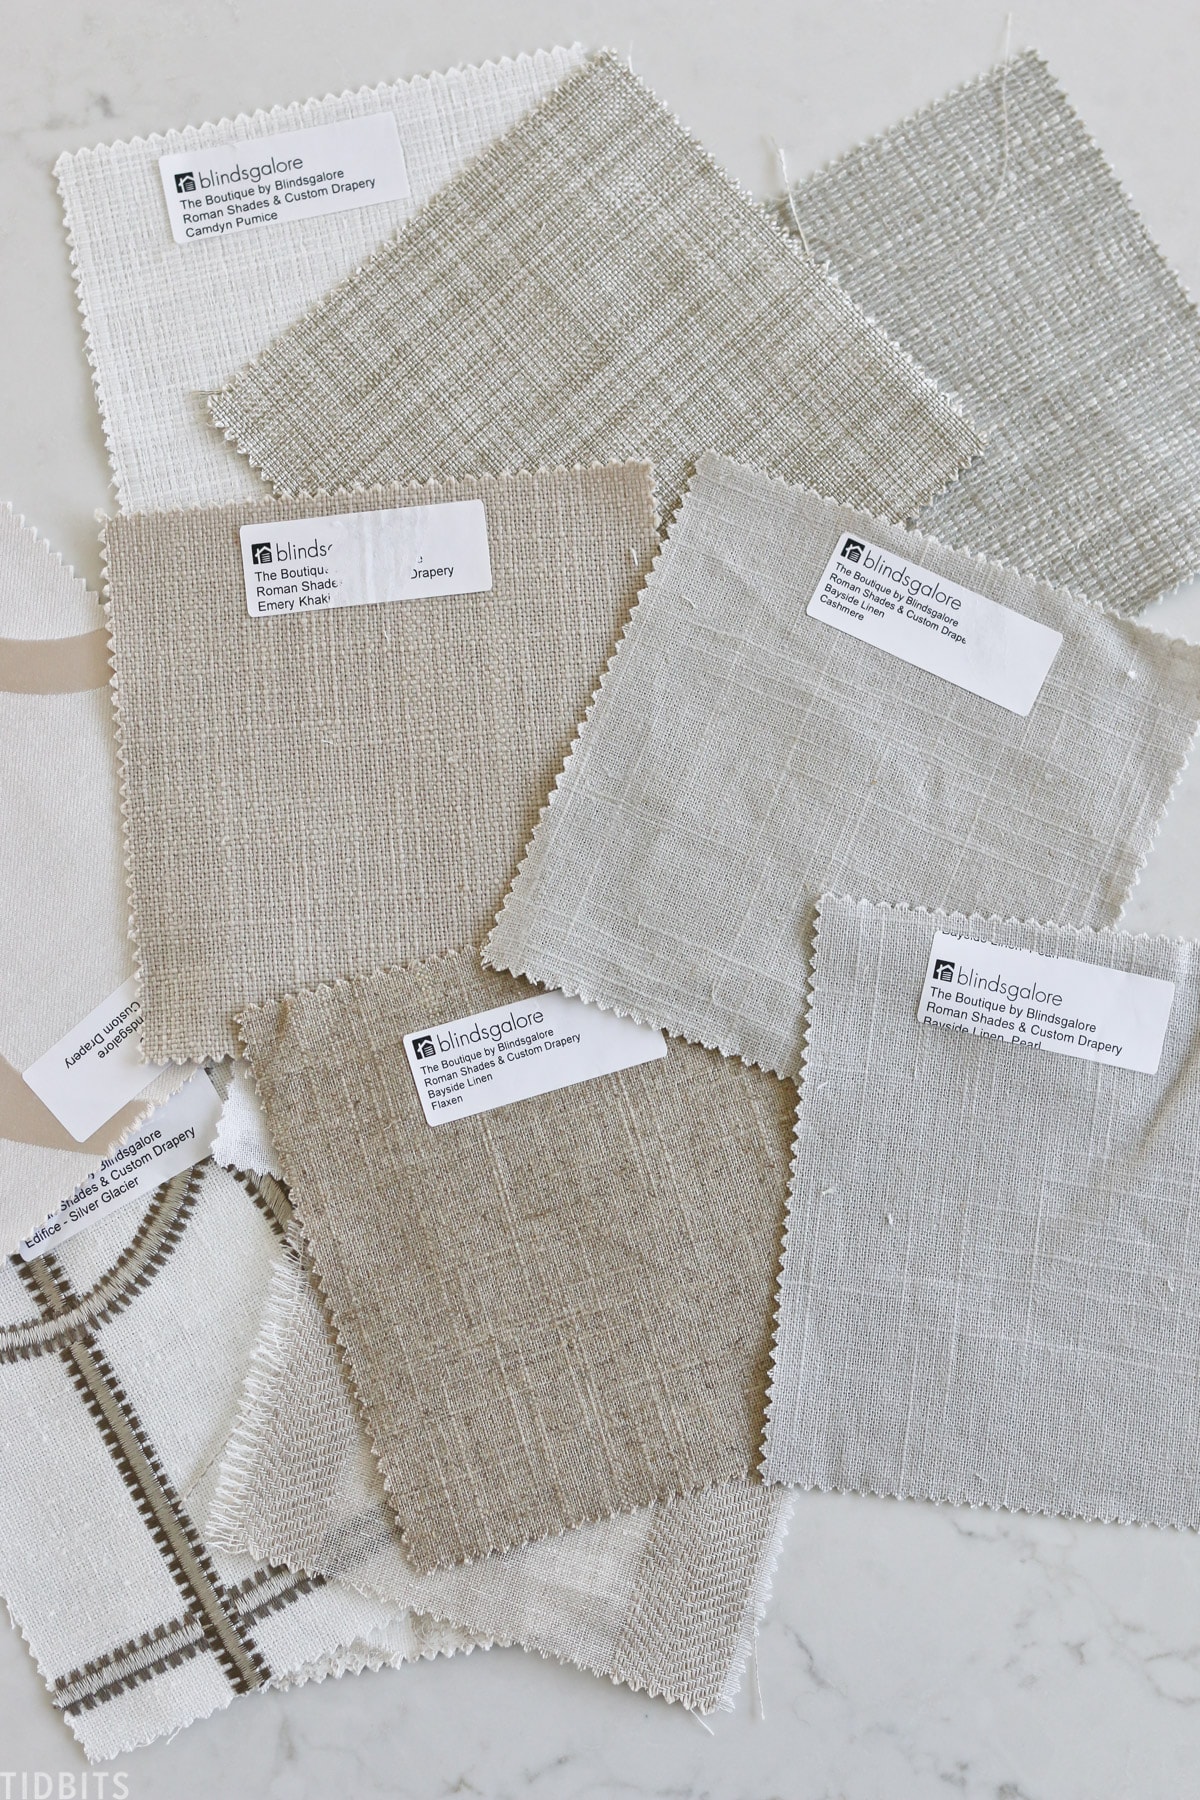 samples of window shades